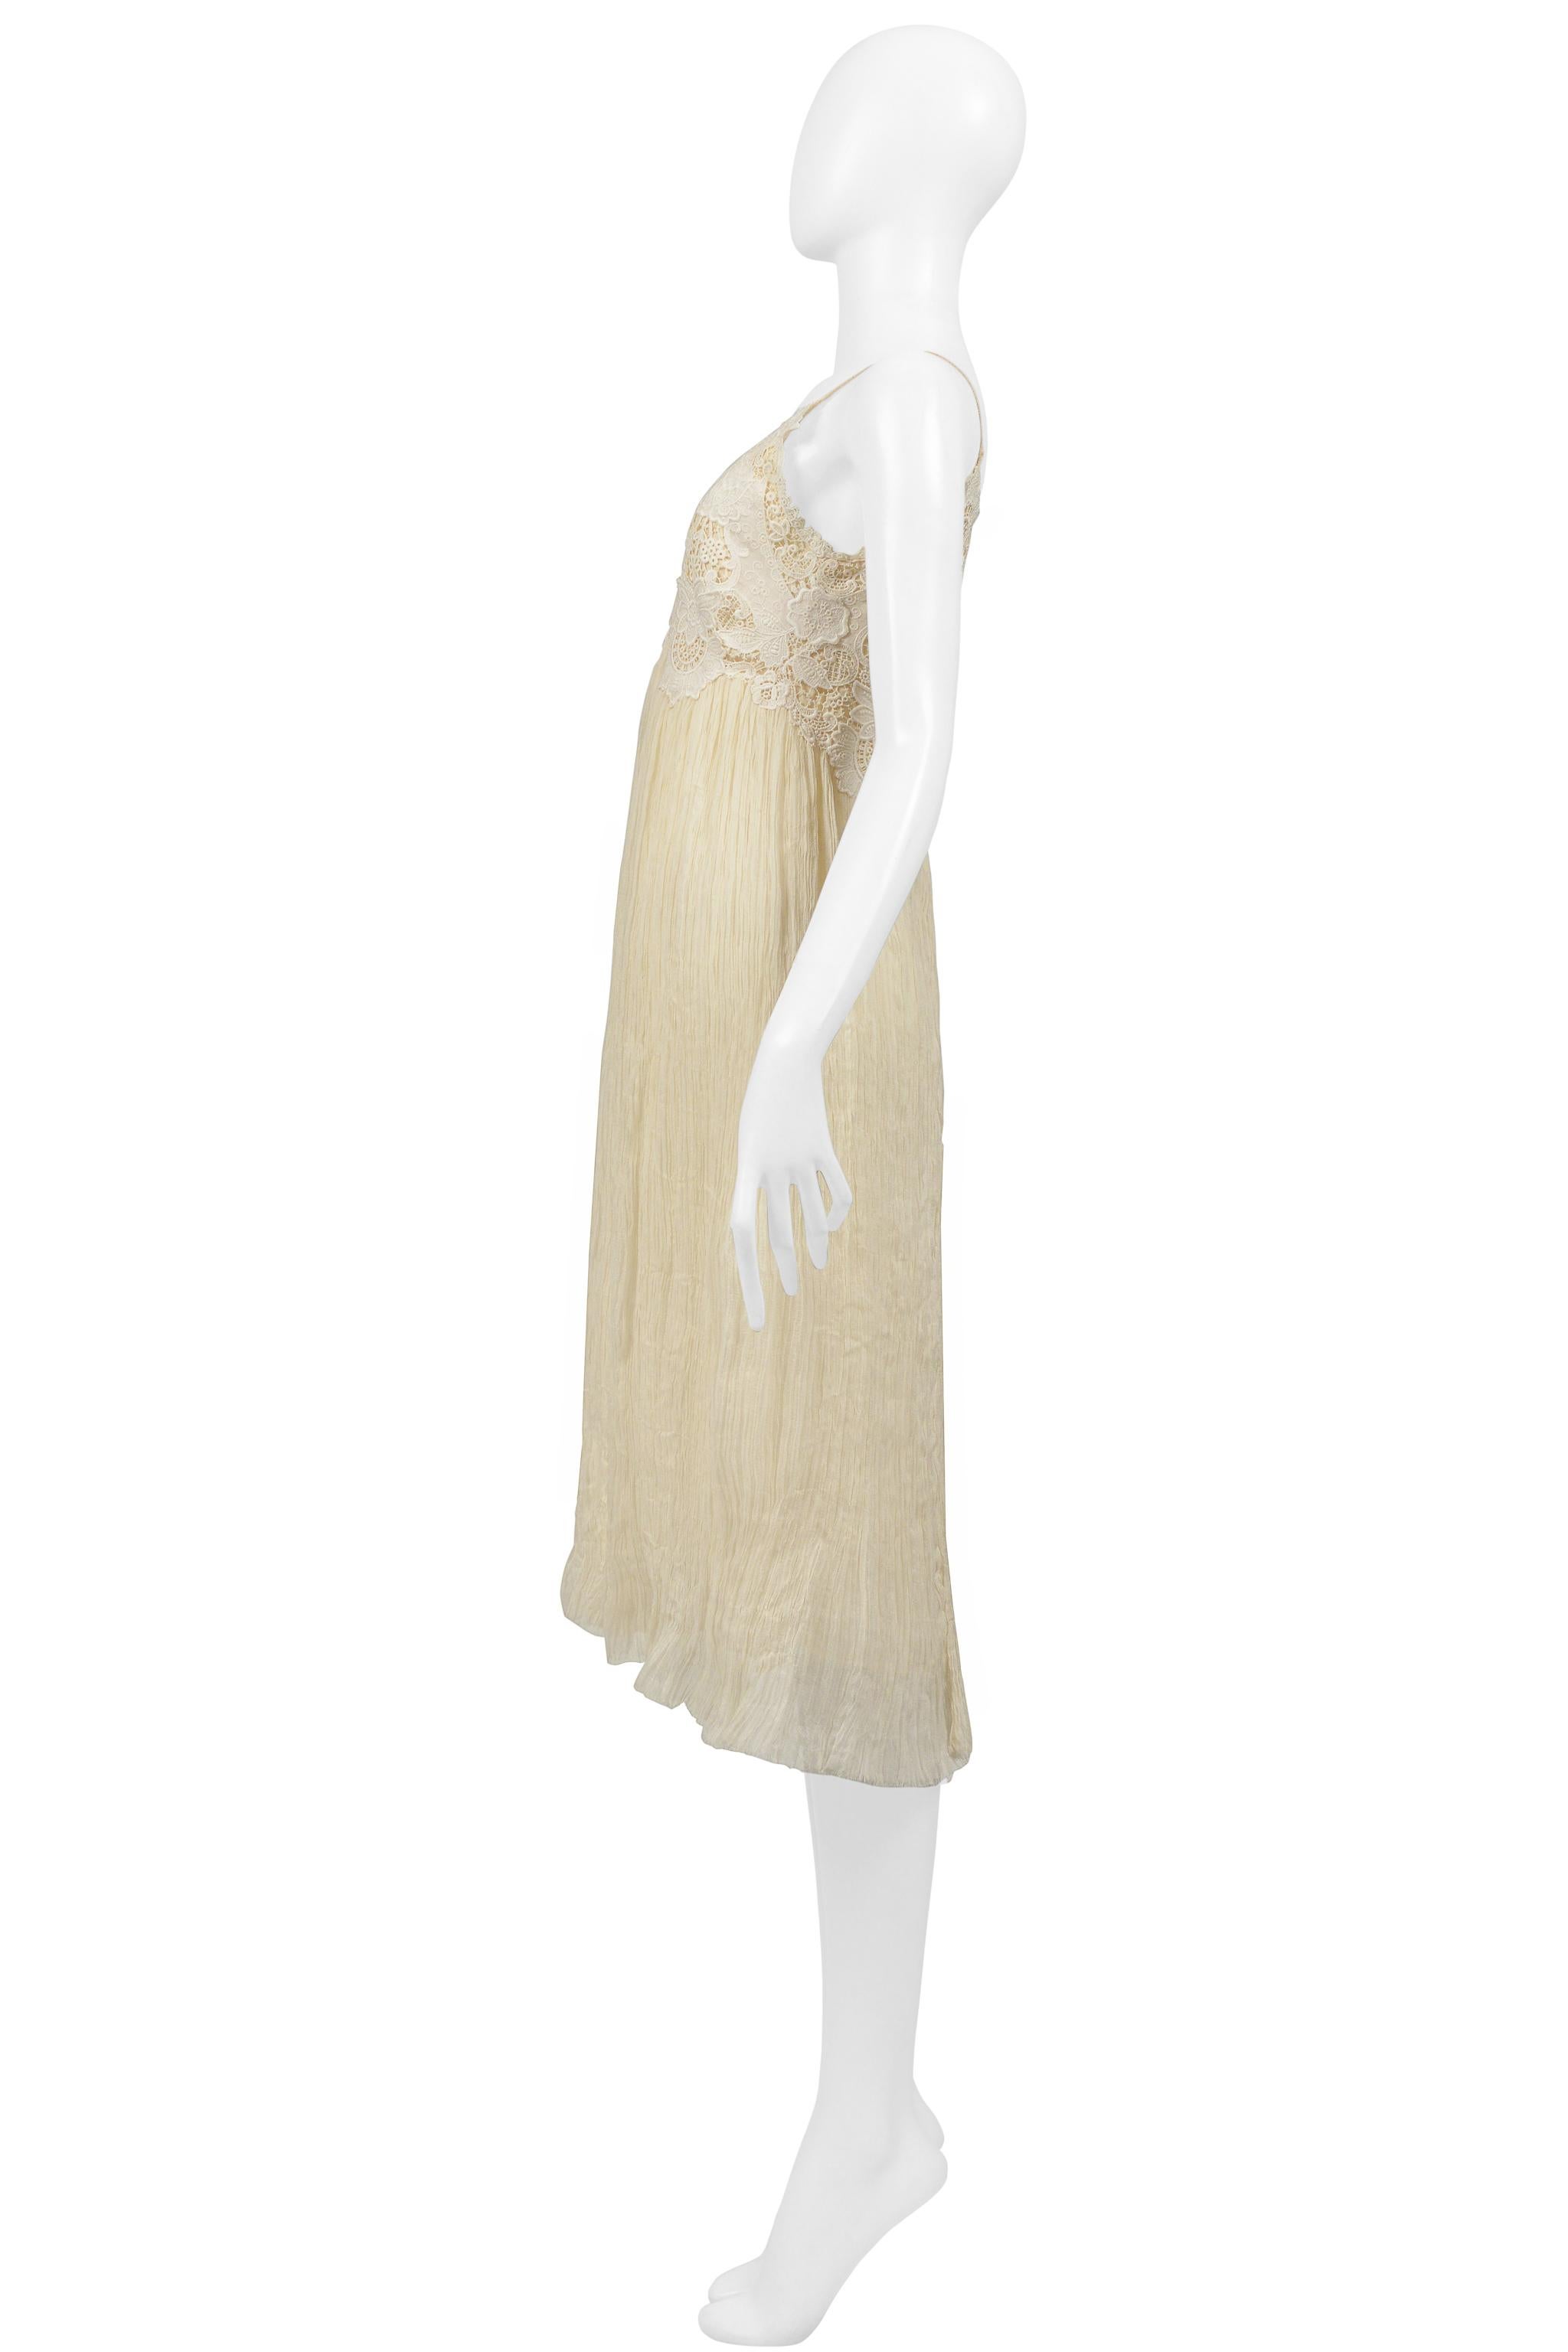 Alexander McQueen Off White Crinkle Dress W Lace Bodice 2005 For Sale 5